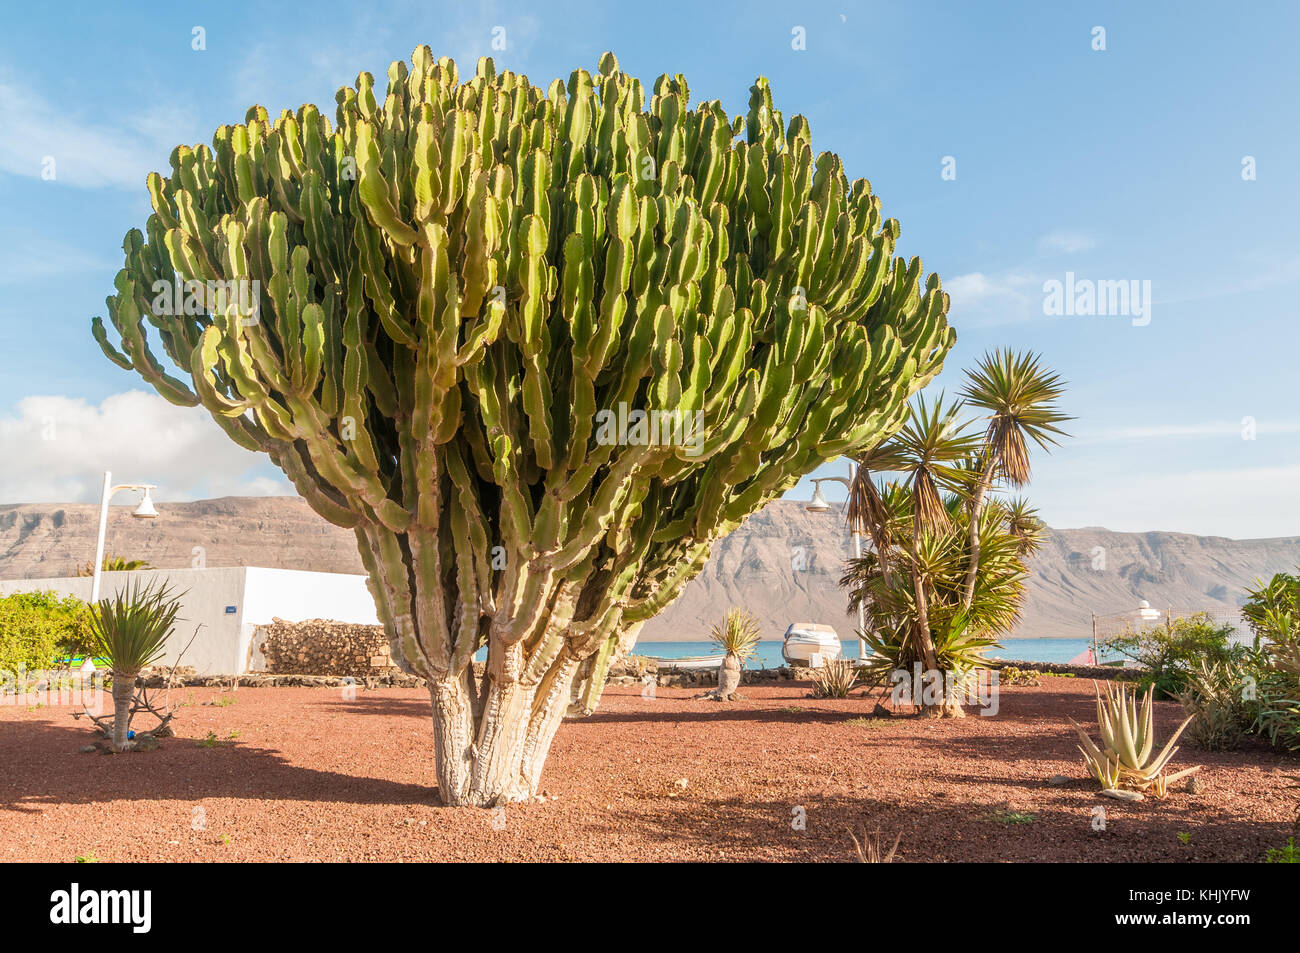 candelabra tree  (Euphorbia candelabrum) in a public square with the islanf of Lanzarote in the background, La Graciosa, Canary Islands, Spain Stock Photo